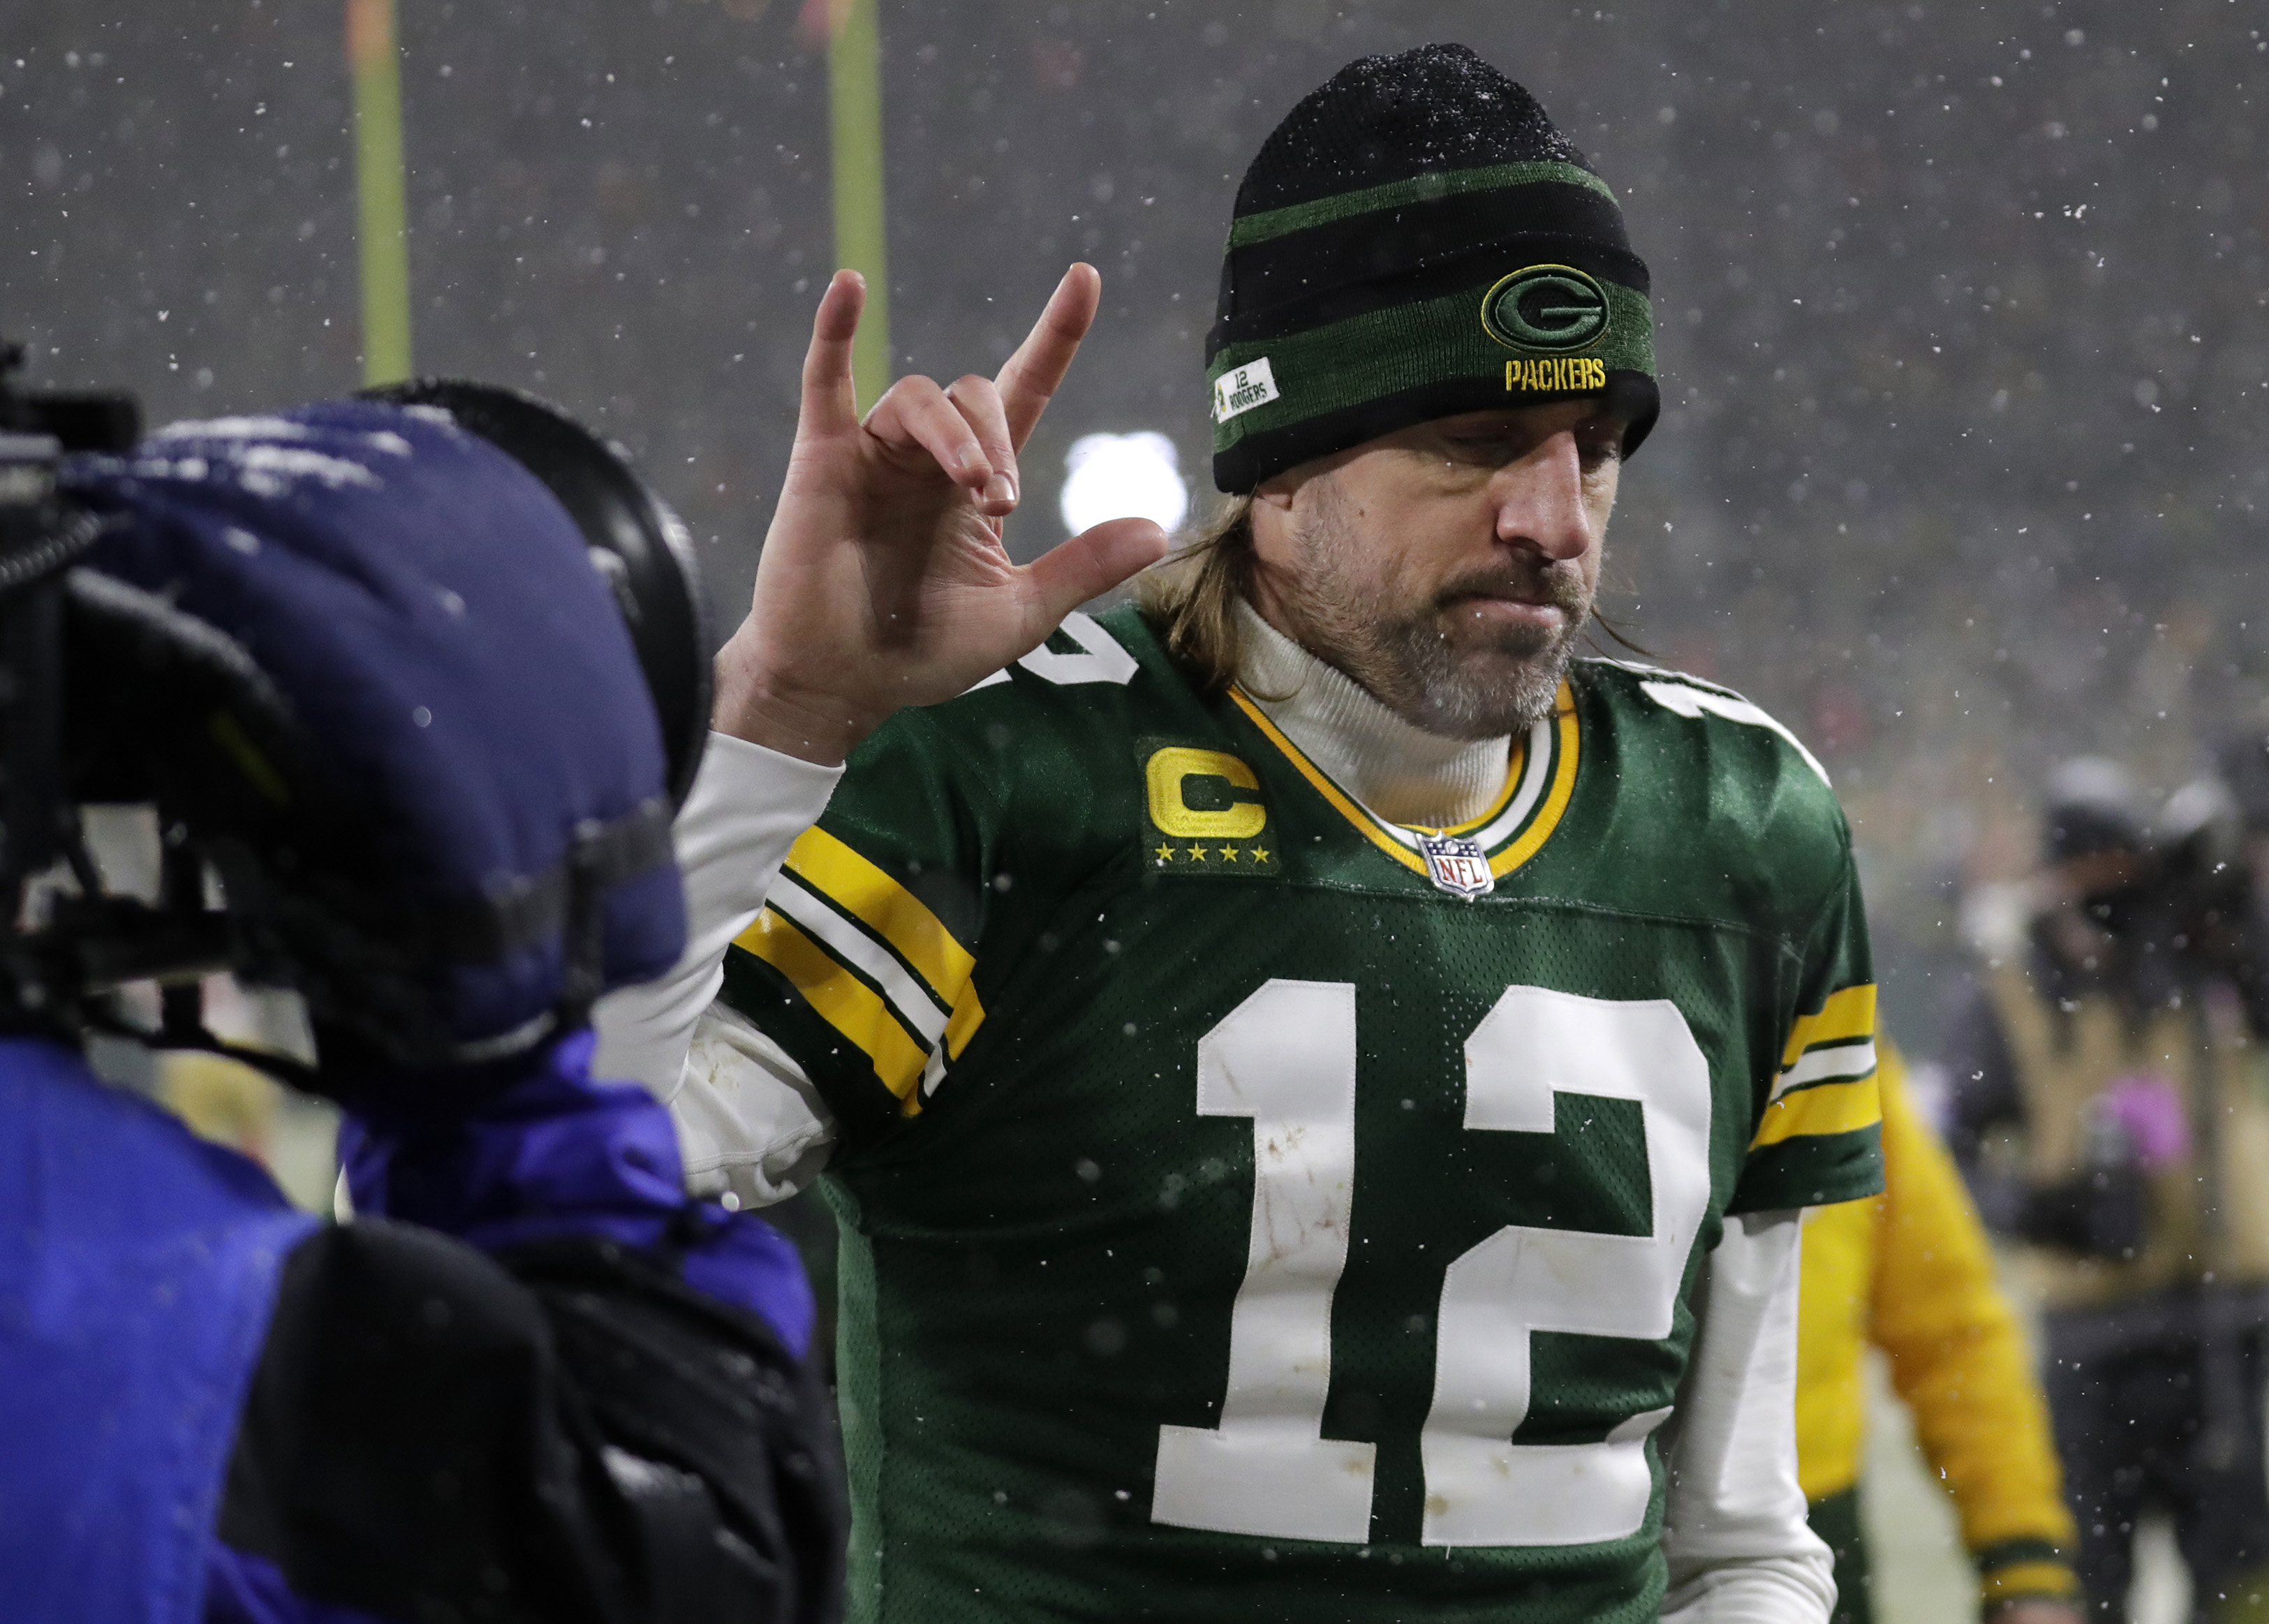 Packers sign QB Aaron Rodgers to 150M deal, lowers '22 cap figure 18M